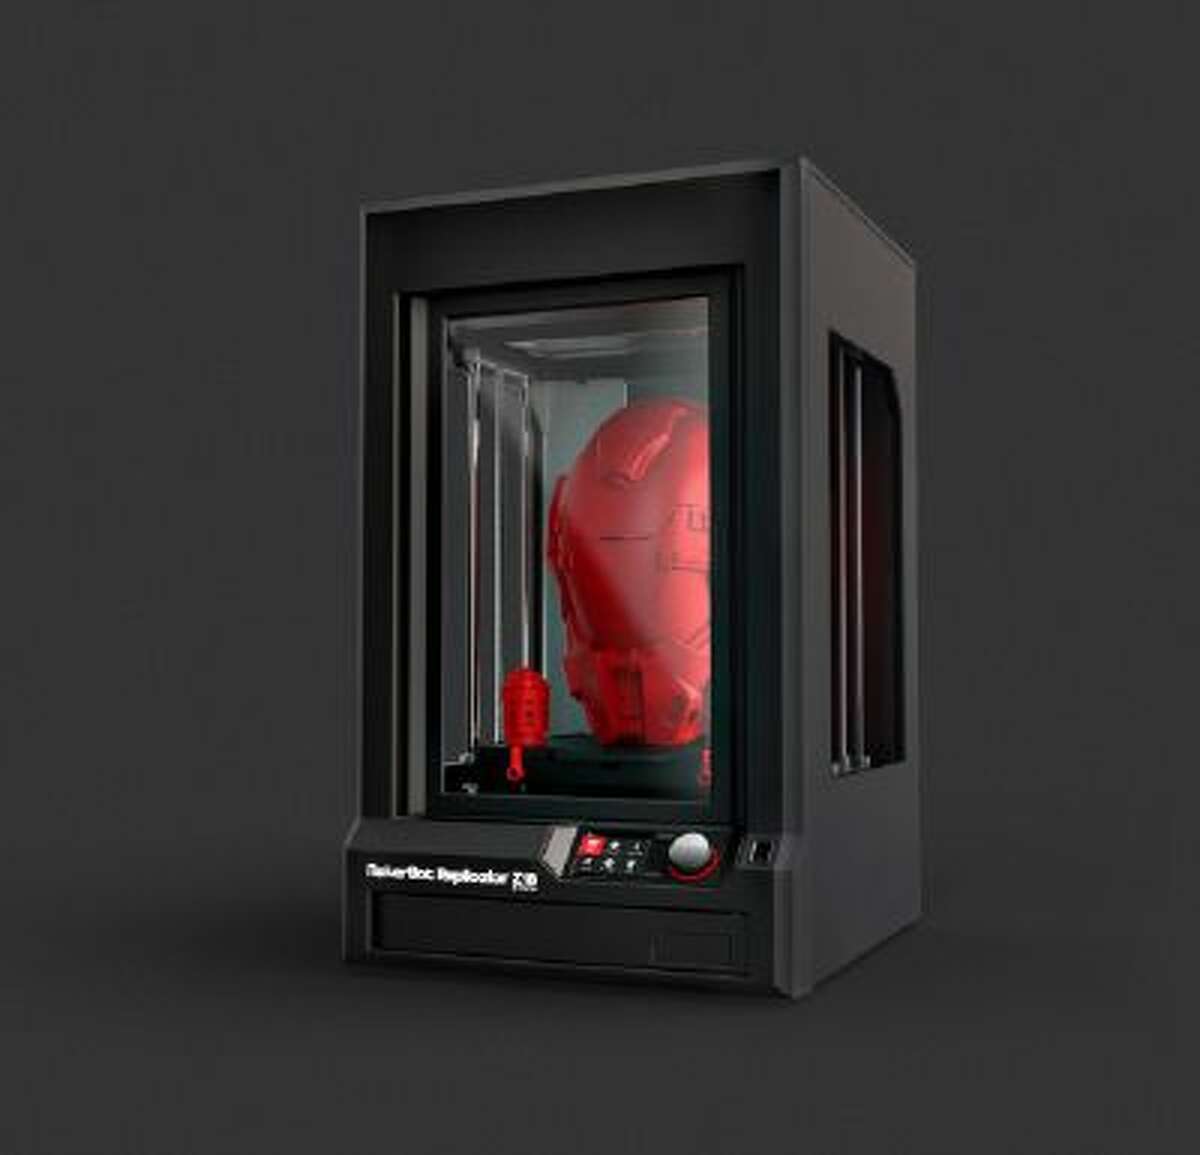 The MakerBot Z18 3D printer produces objects six times larger than MakerBot's standard Replicator.